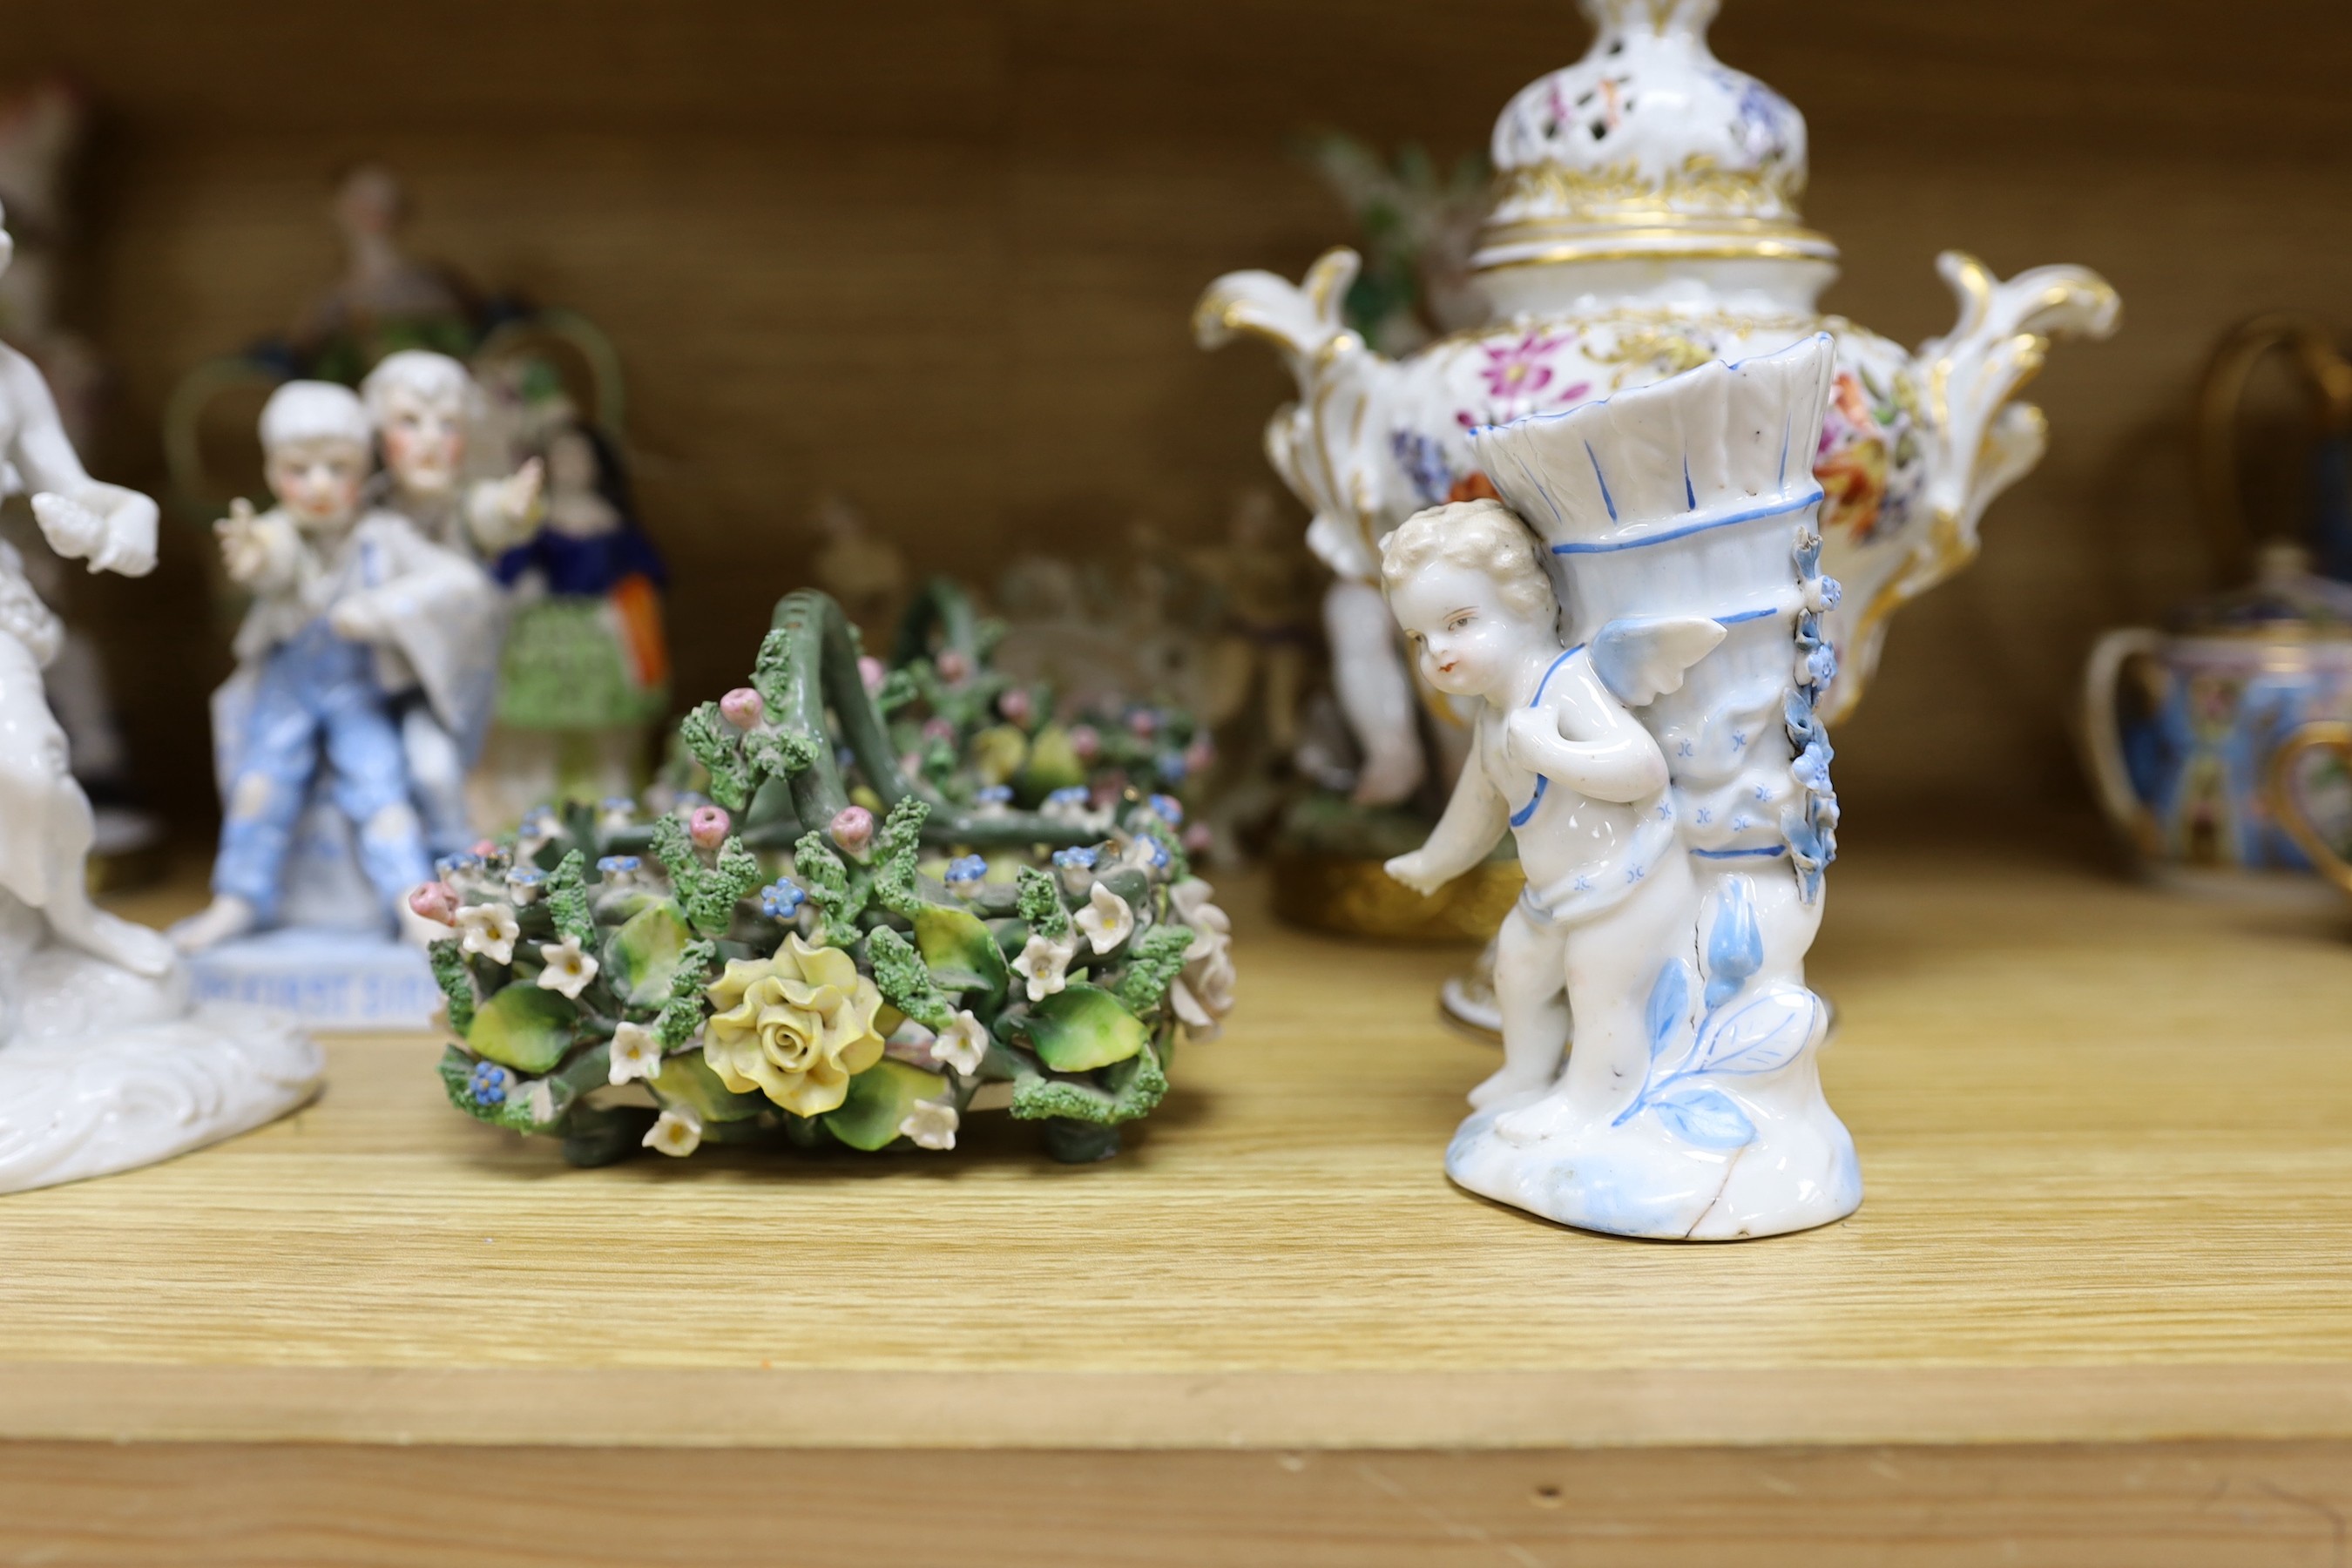 A group of continental and British porcelain figures and ornaments, to include Coalport, Staffordshire, Unterweissbach and others